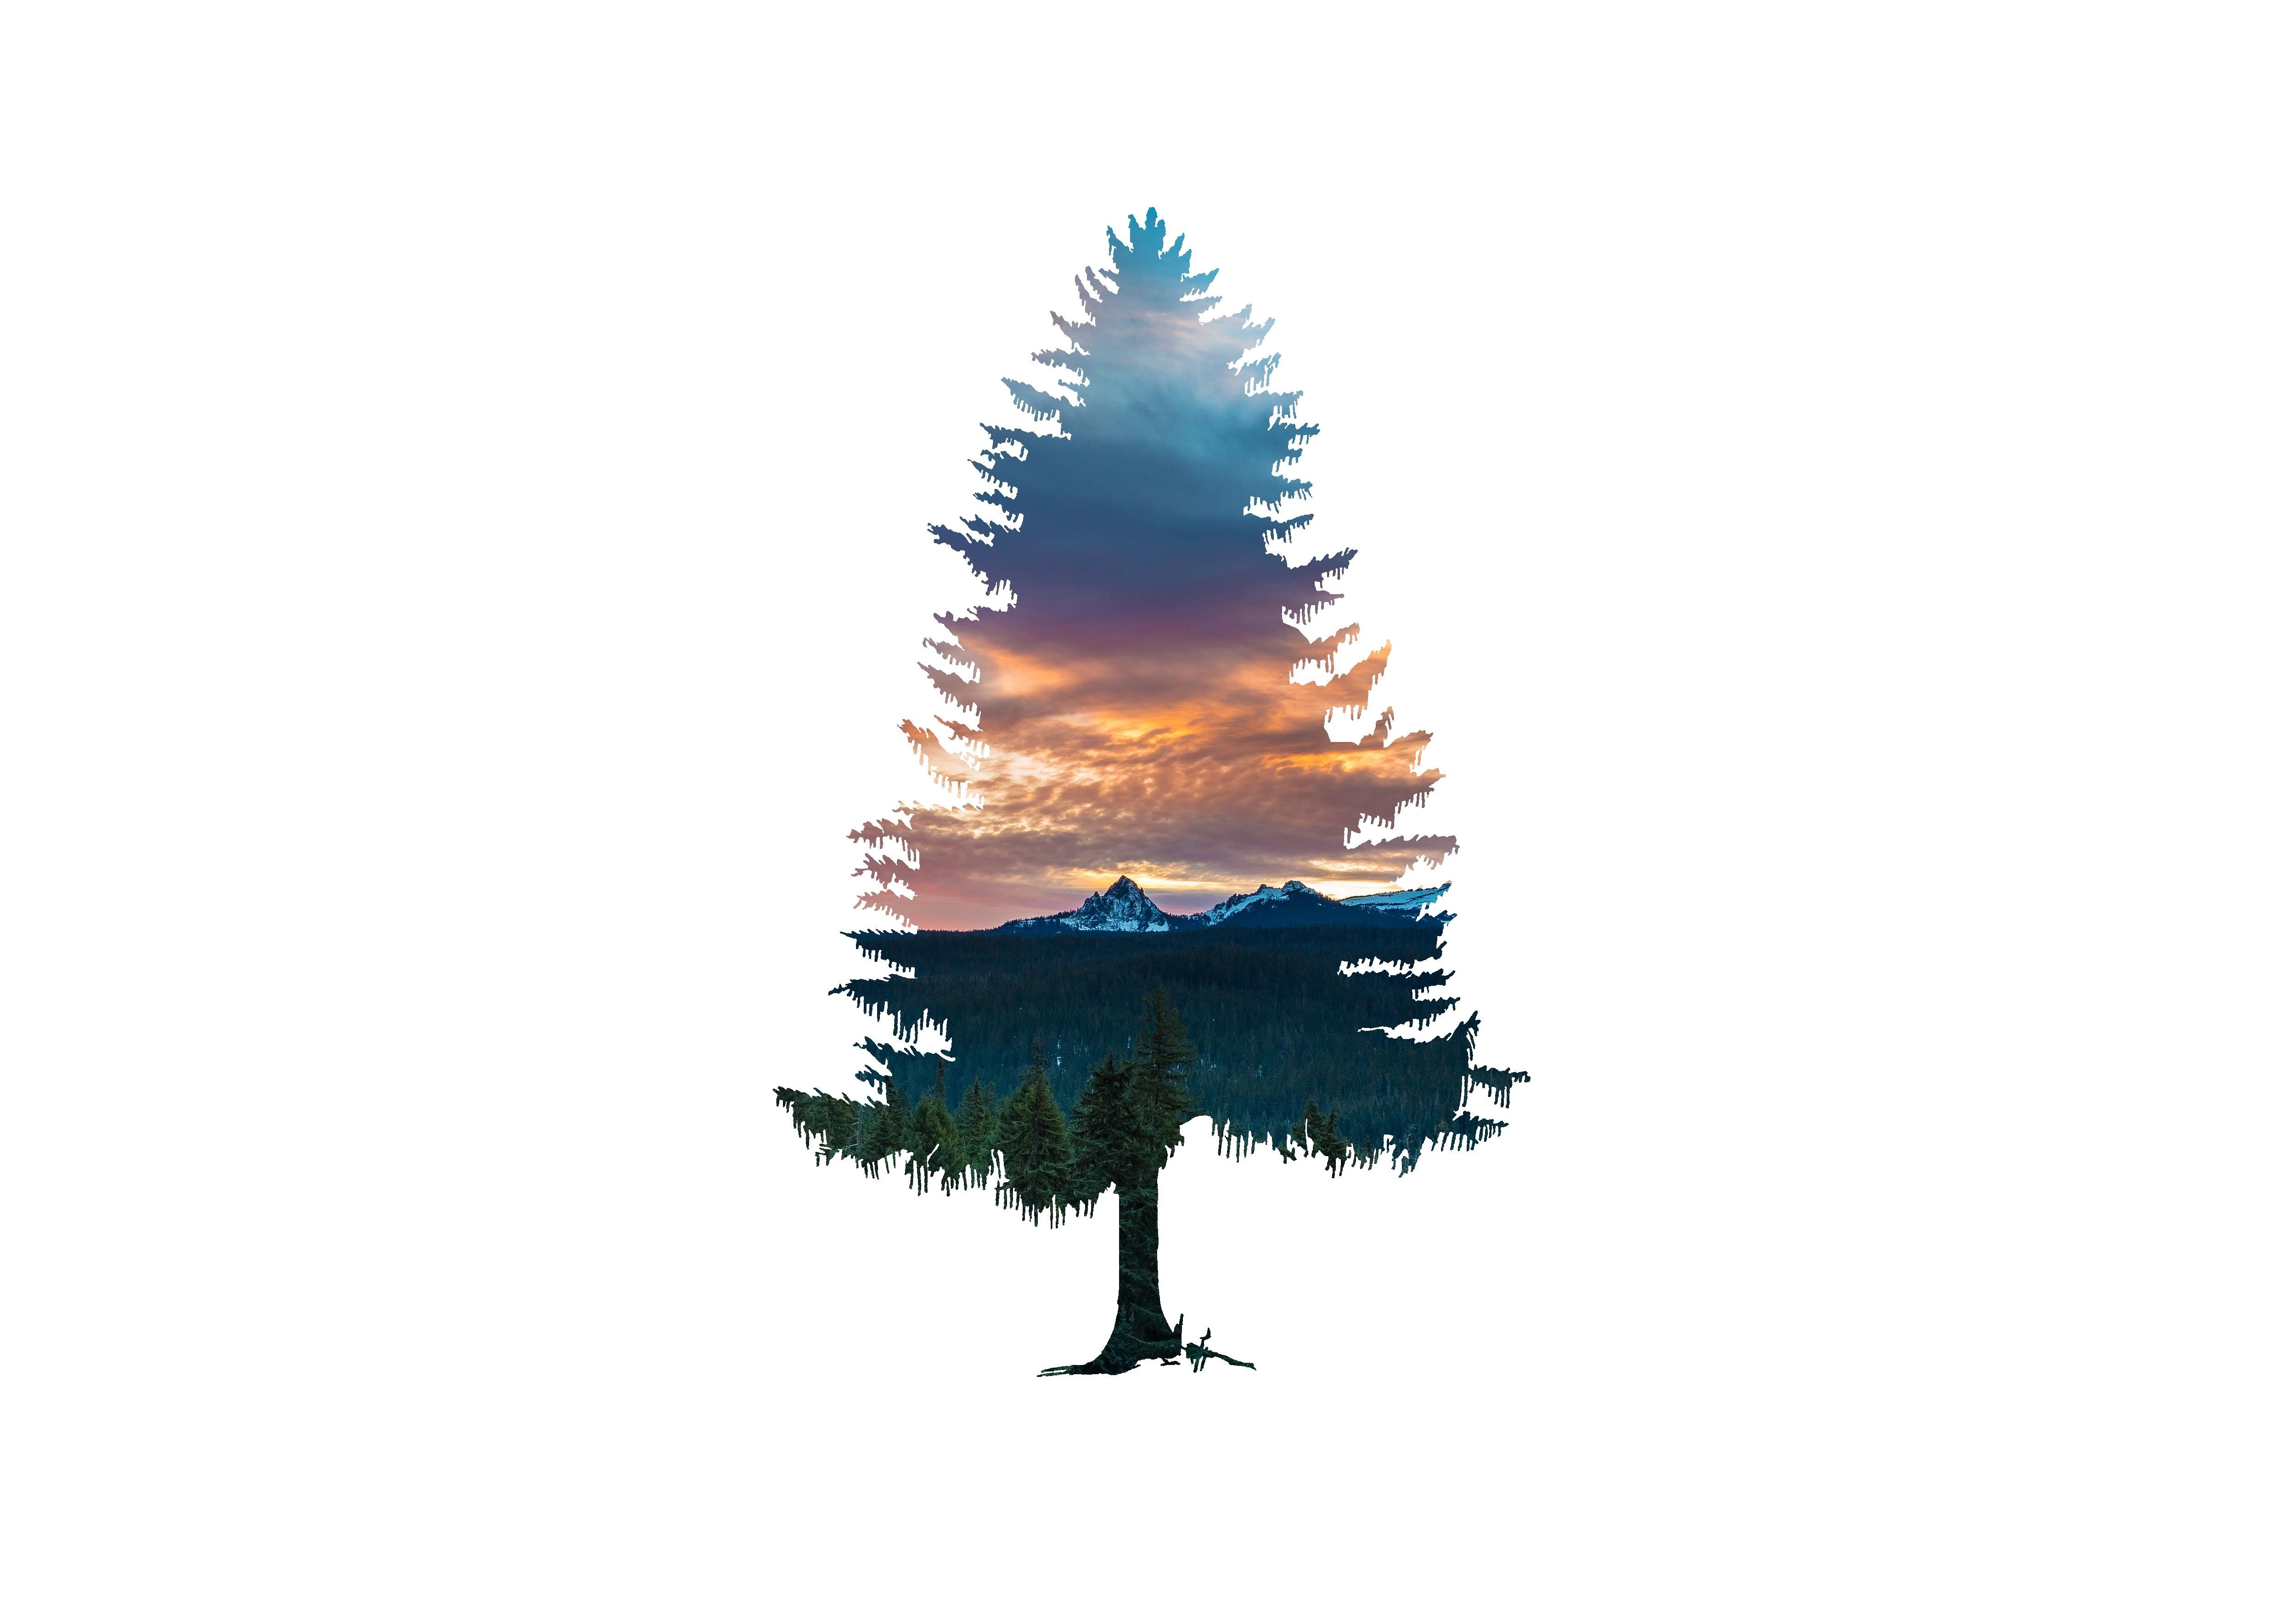 Wallpaper, minimalism, forest, trees, simple background, artwork, bright, plants 5000x3500